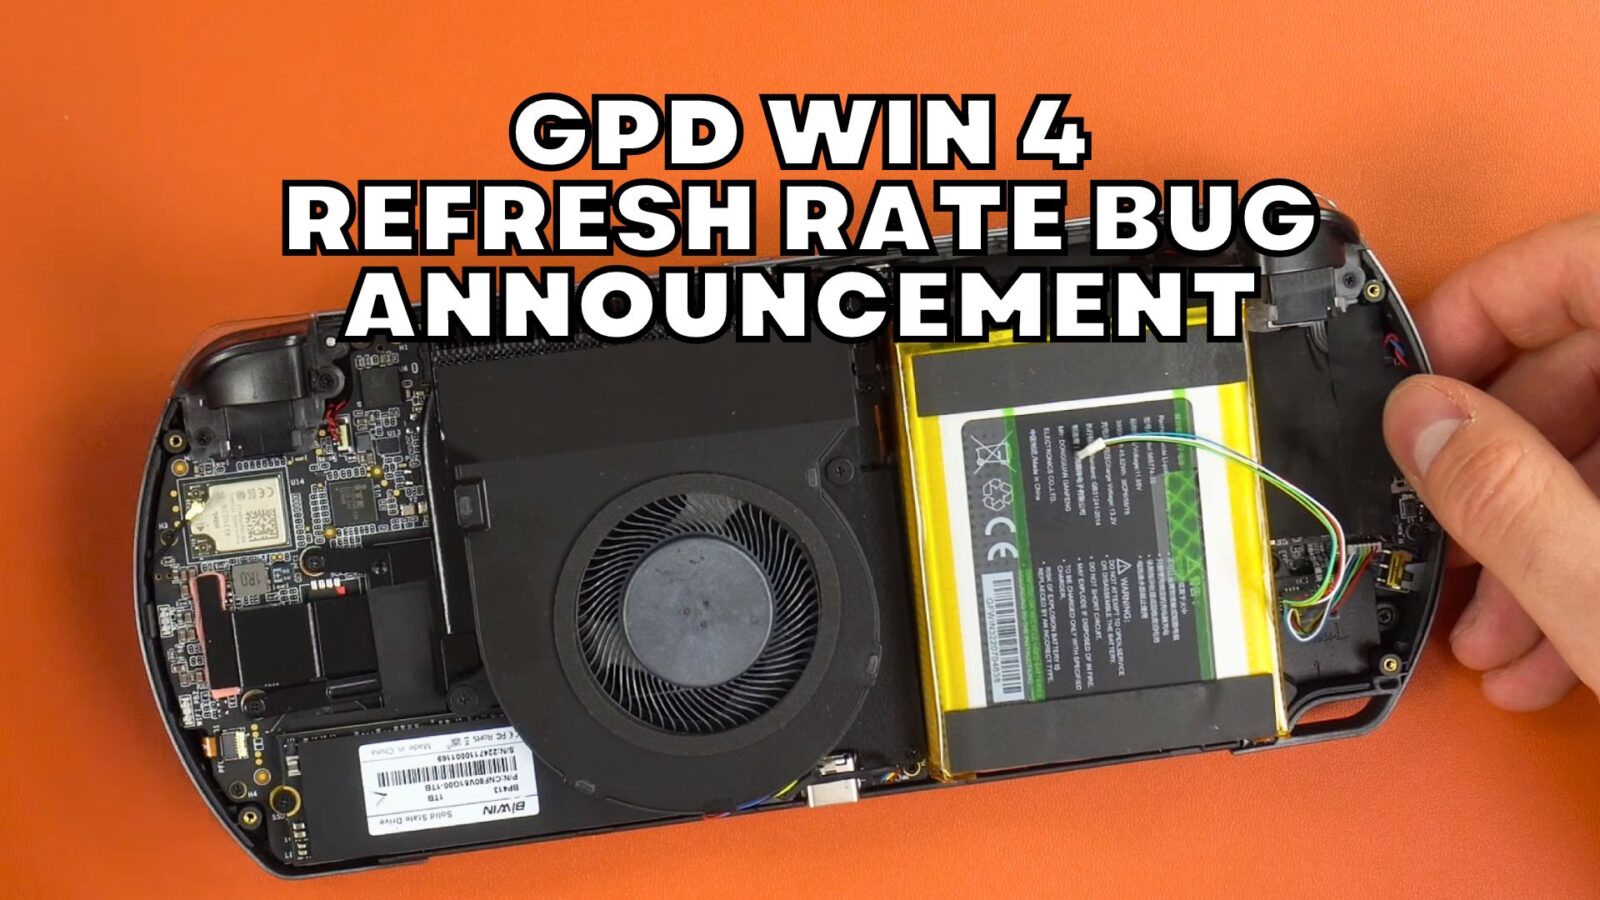 GPD WIN 4 refresh rate bug announcement